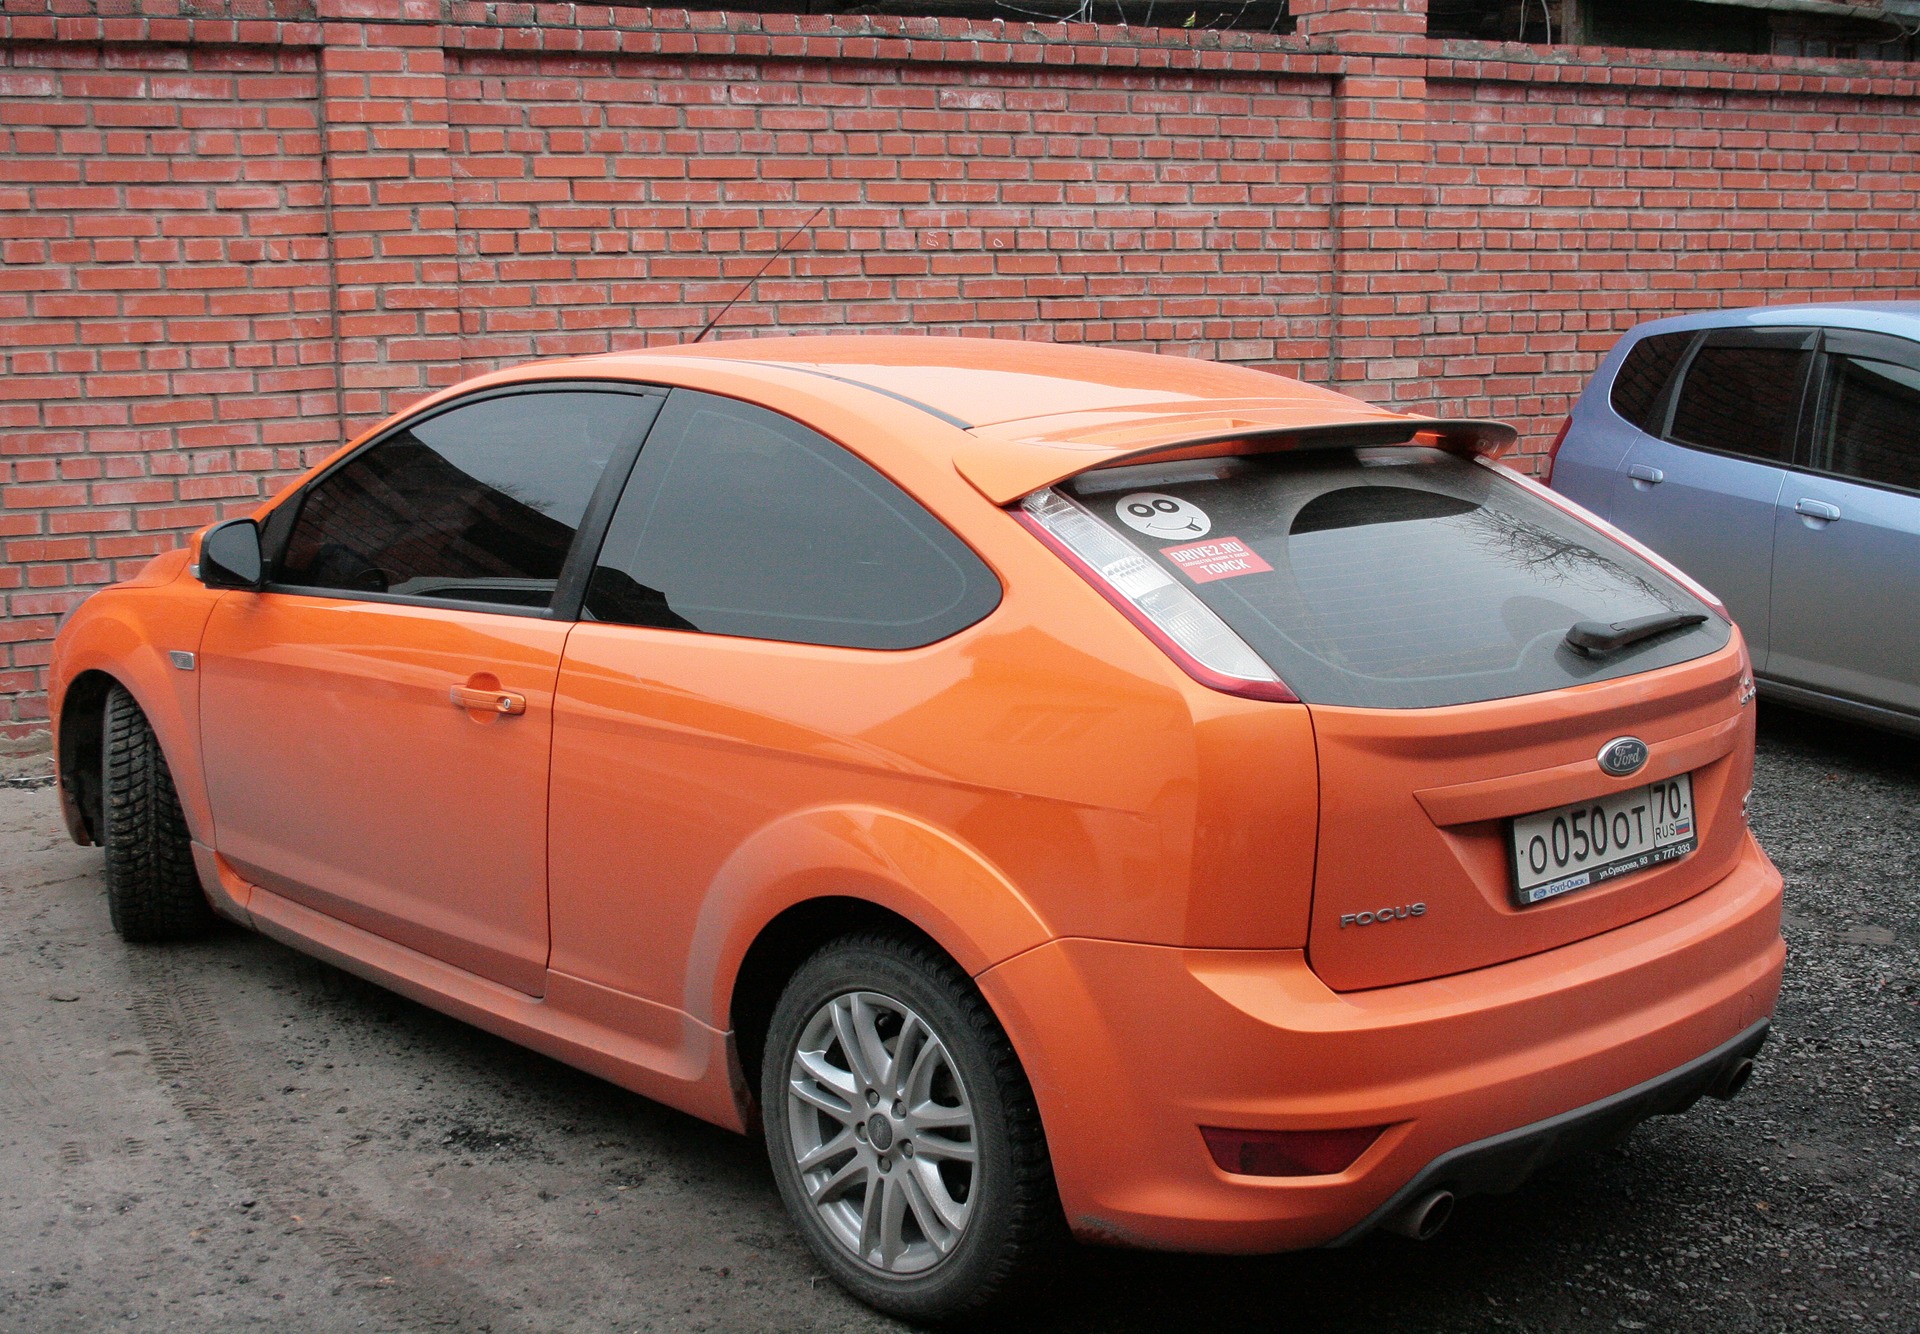 St 2 5 3. Форд 2 St. Фокус 2 St. Форд фокус 2 St. Ford Focus 2 St 2006.